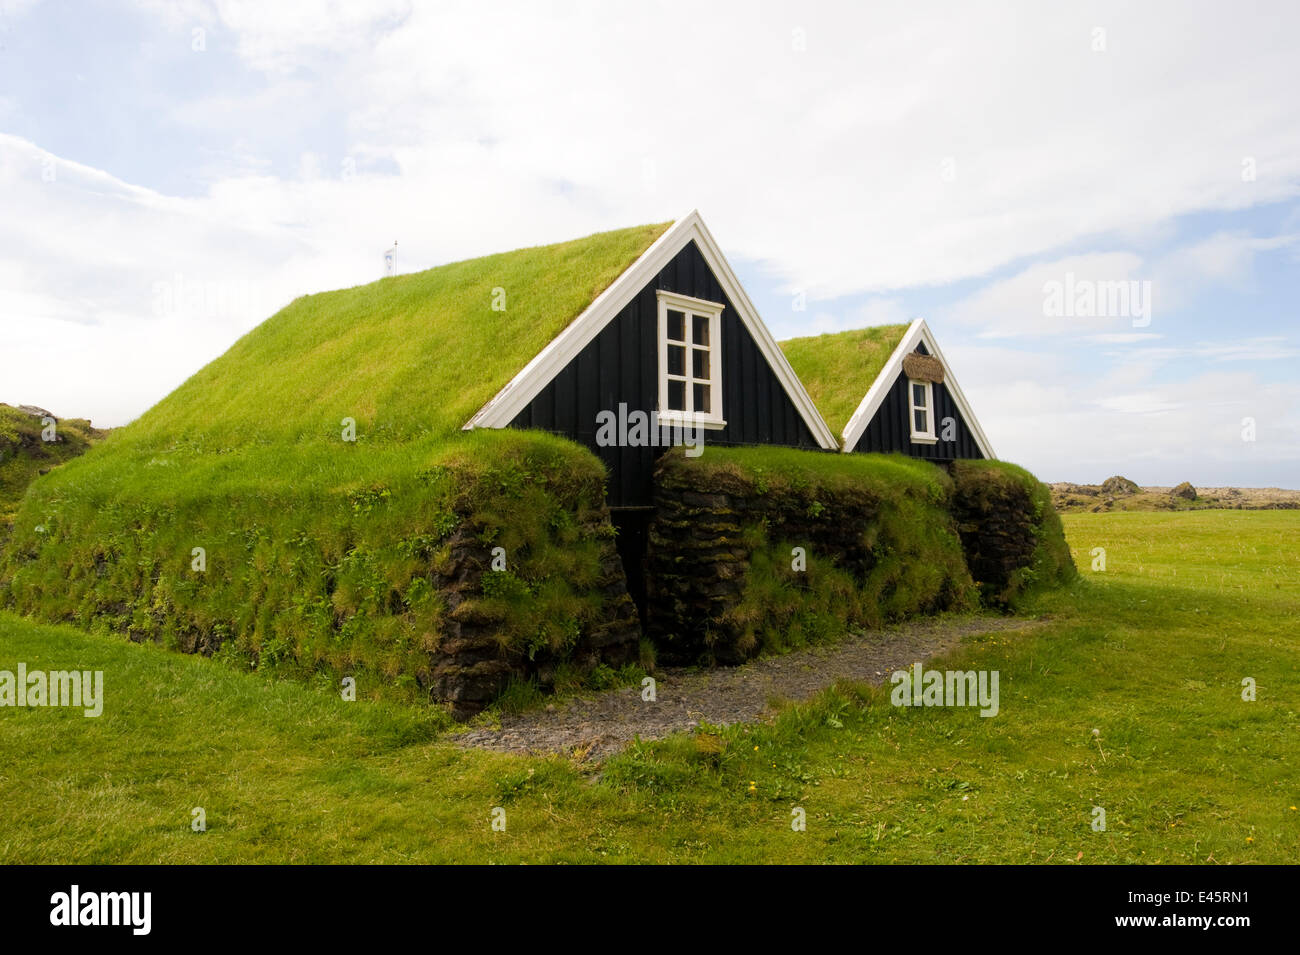 Houses with grass roof and walls, Snafellsness Peninsula, Iceland, July 2008 Stock Photo